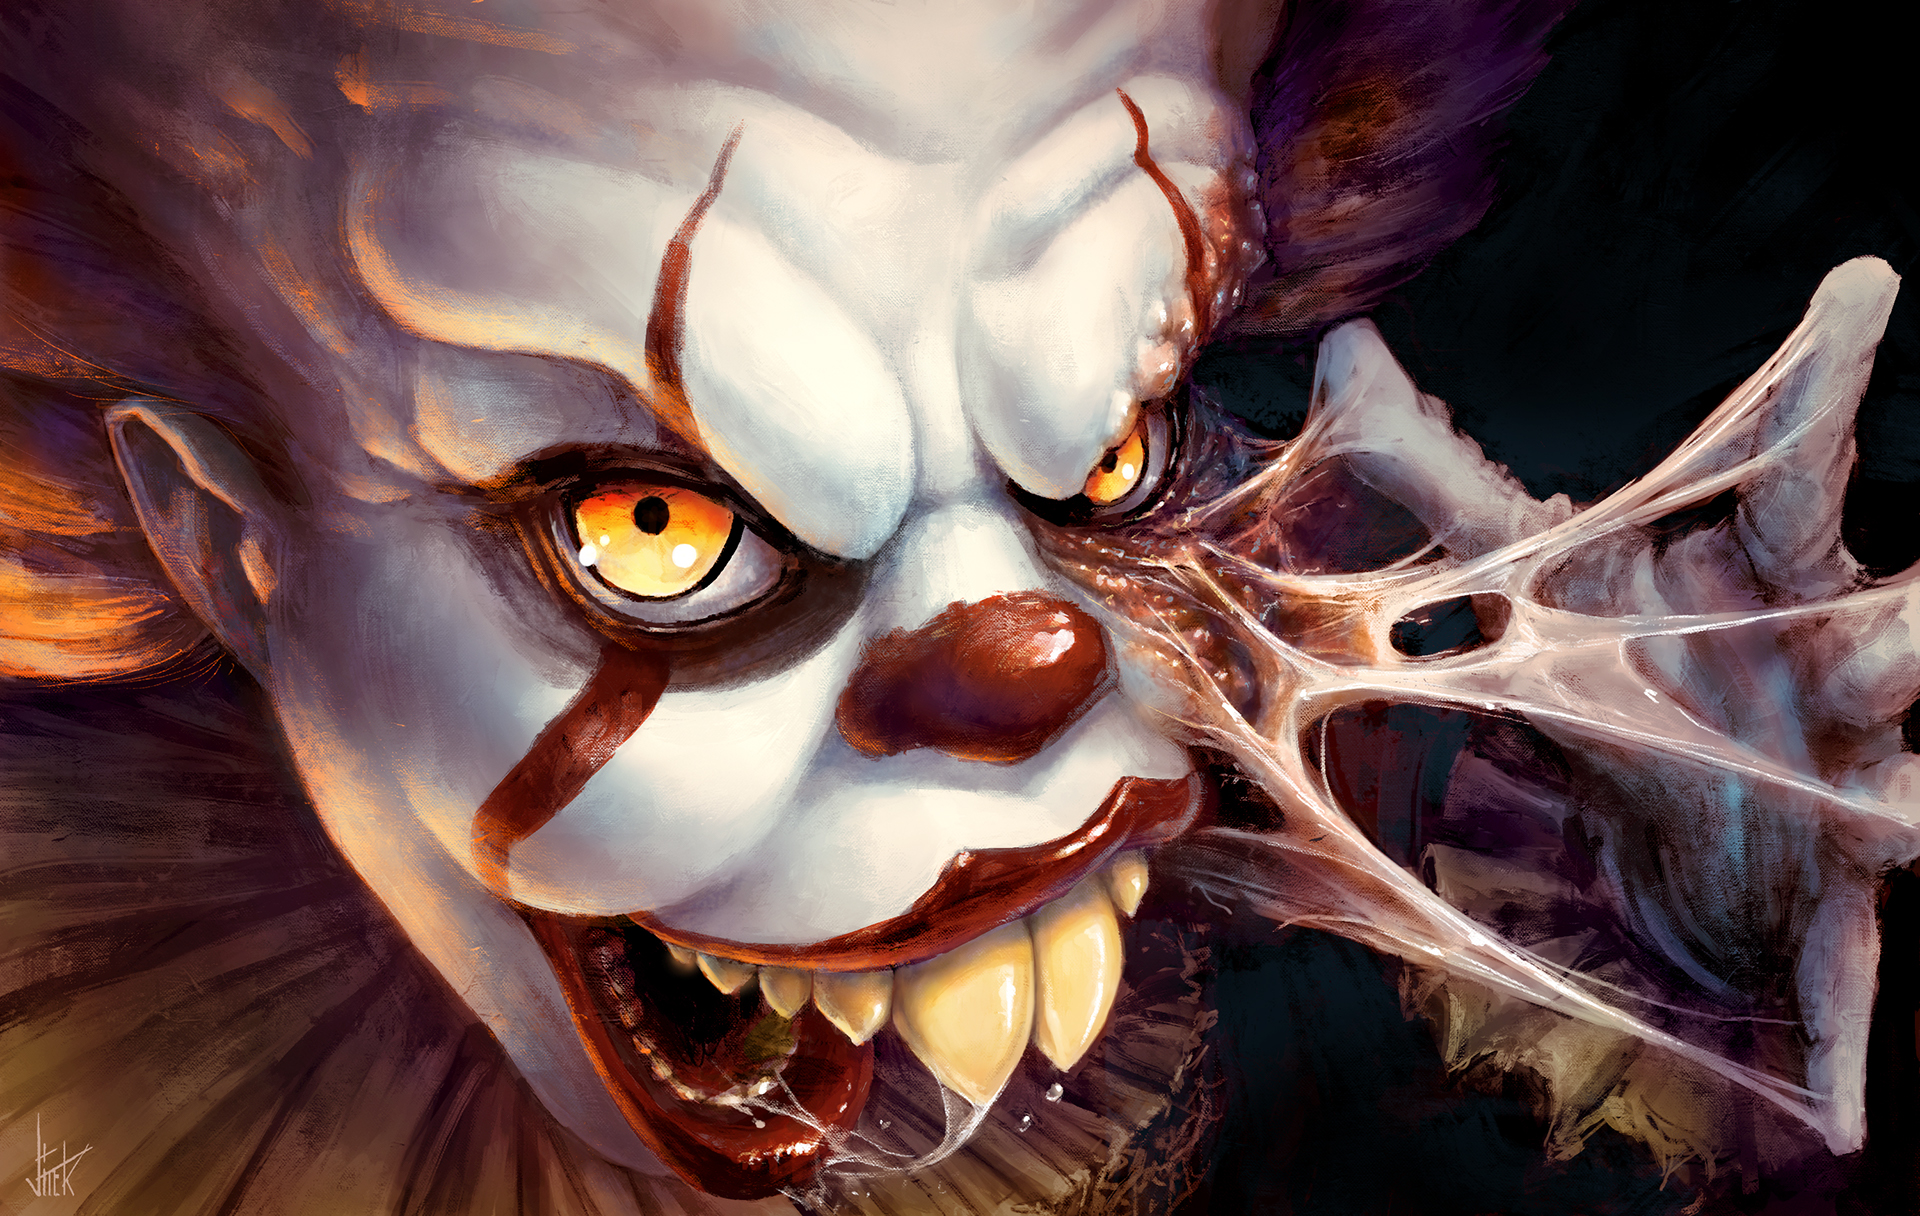 #creatures IT #Stephen King's IT #Movie inspired art clown pennywise s...